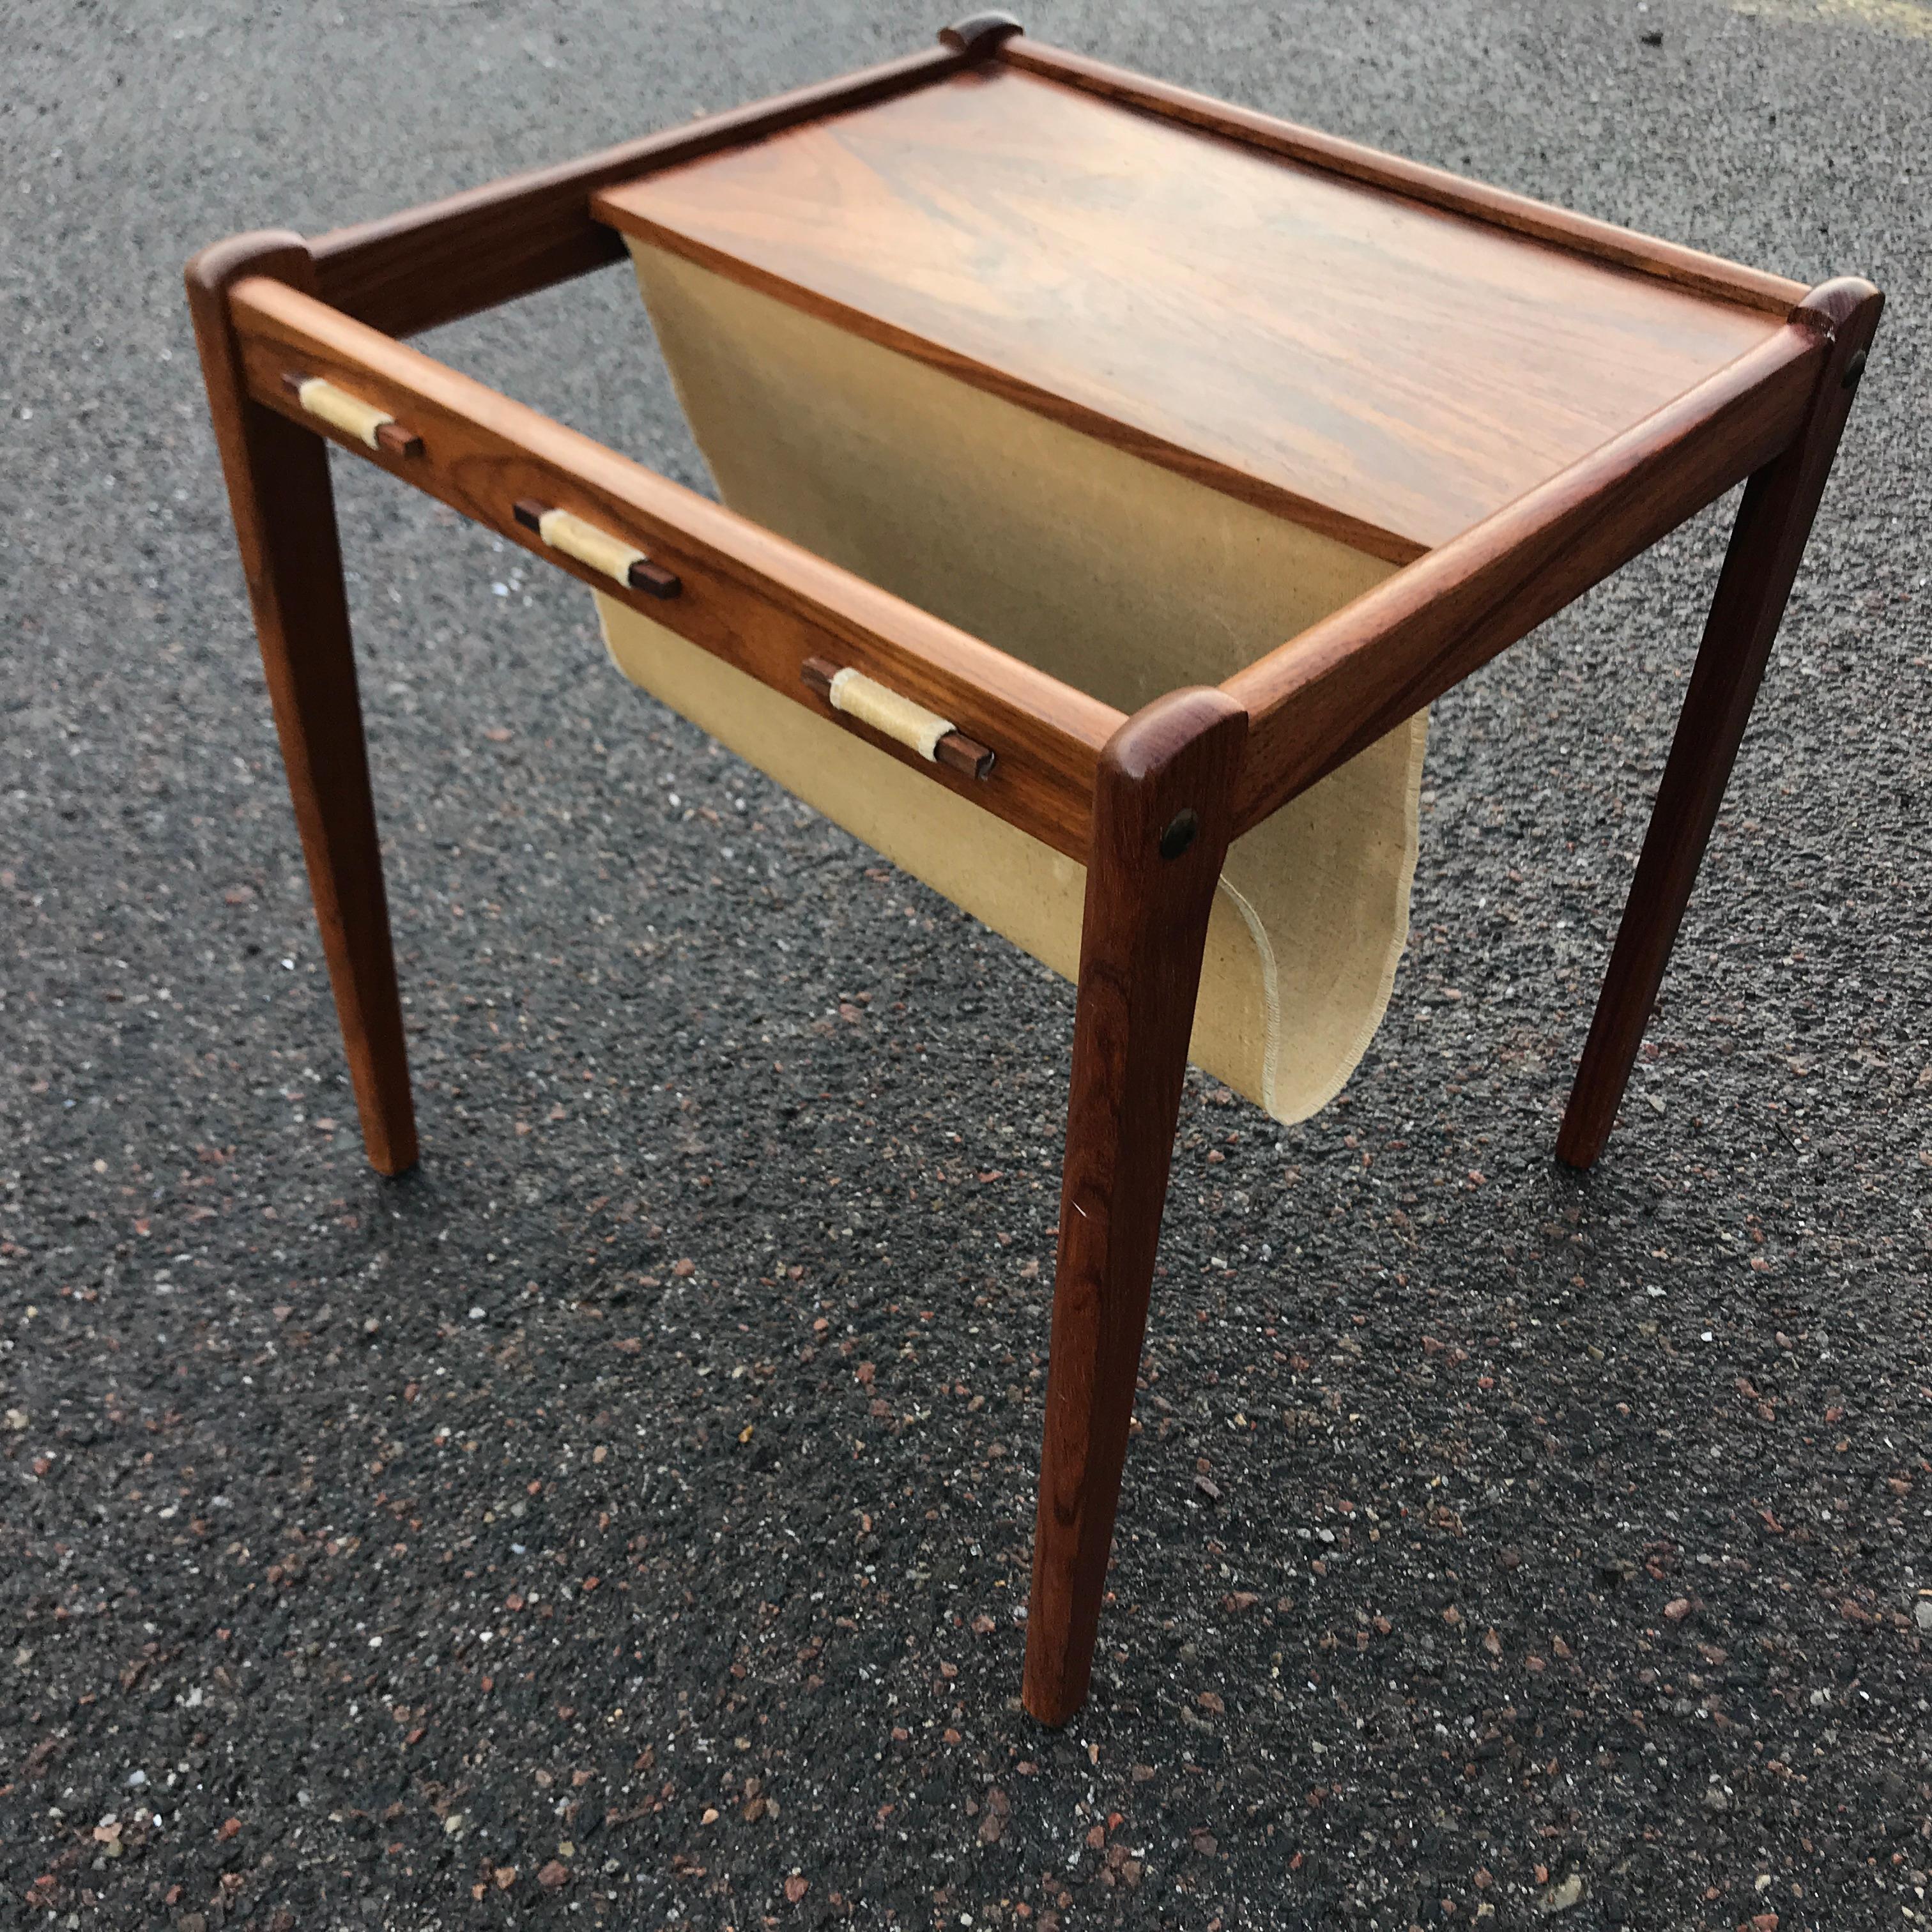 Quality craftsmanship shines through the unique rosewood finish on this elegant Mid-Century Modern side table.